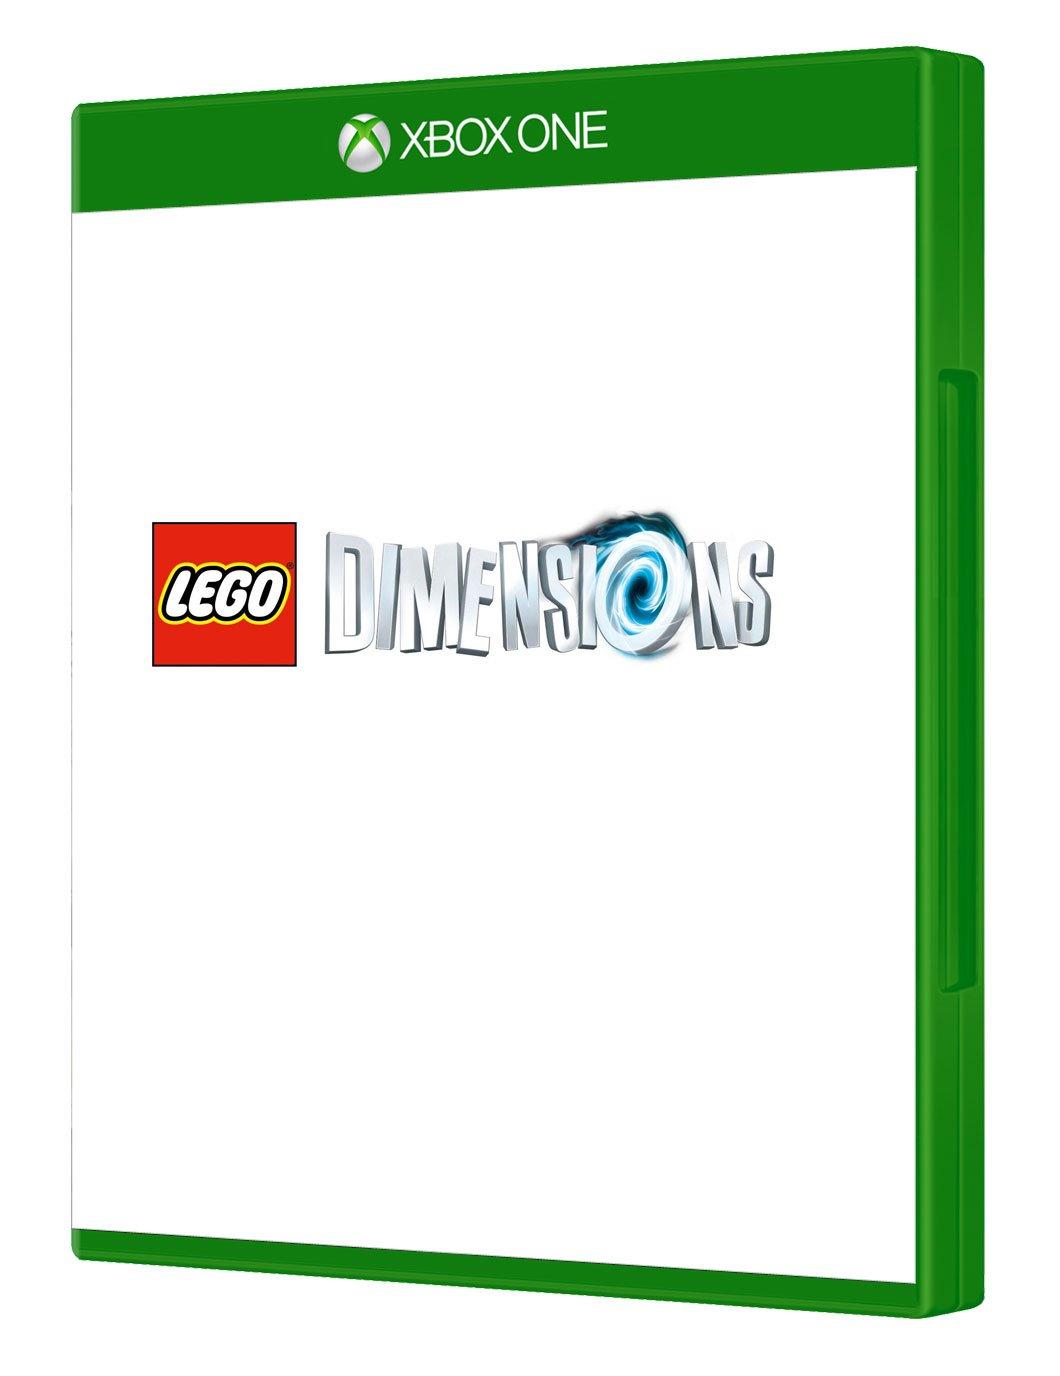 LEGO Dimensions Xbox One 2015 Game & Manual 1-2 players pre-owned